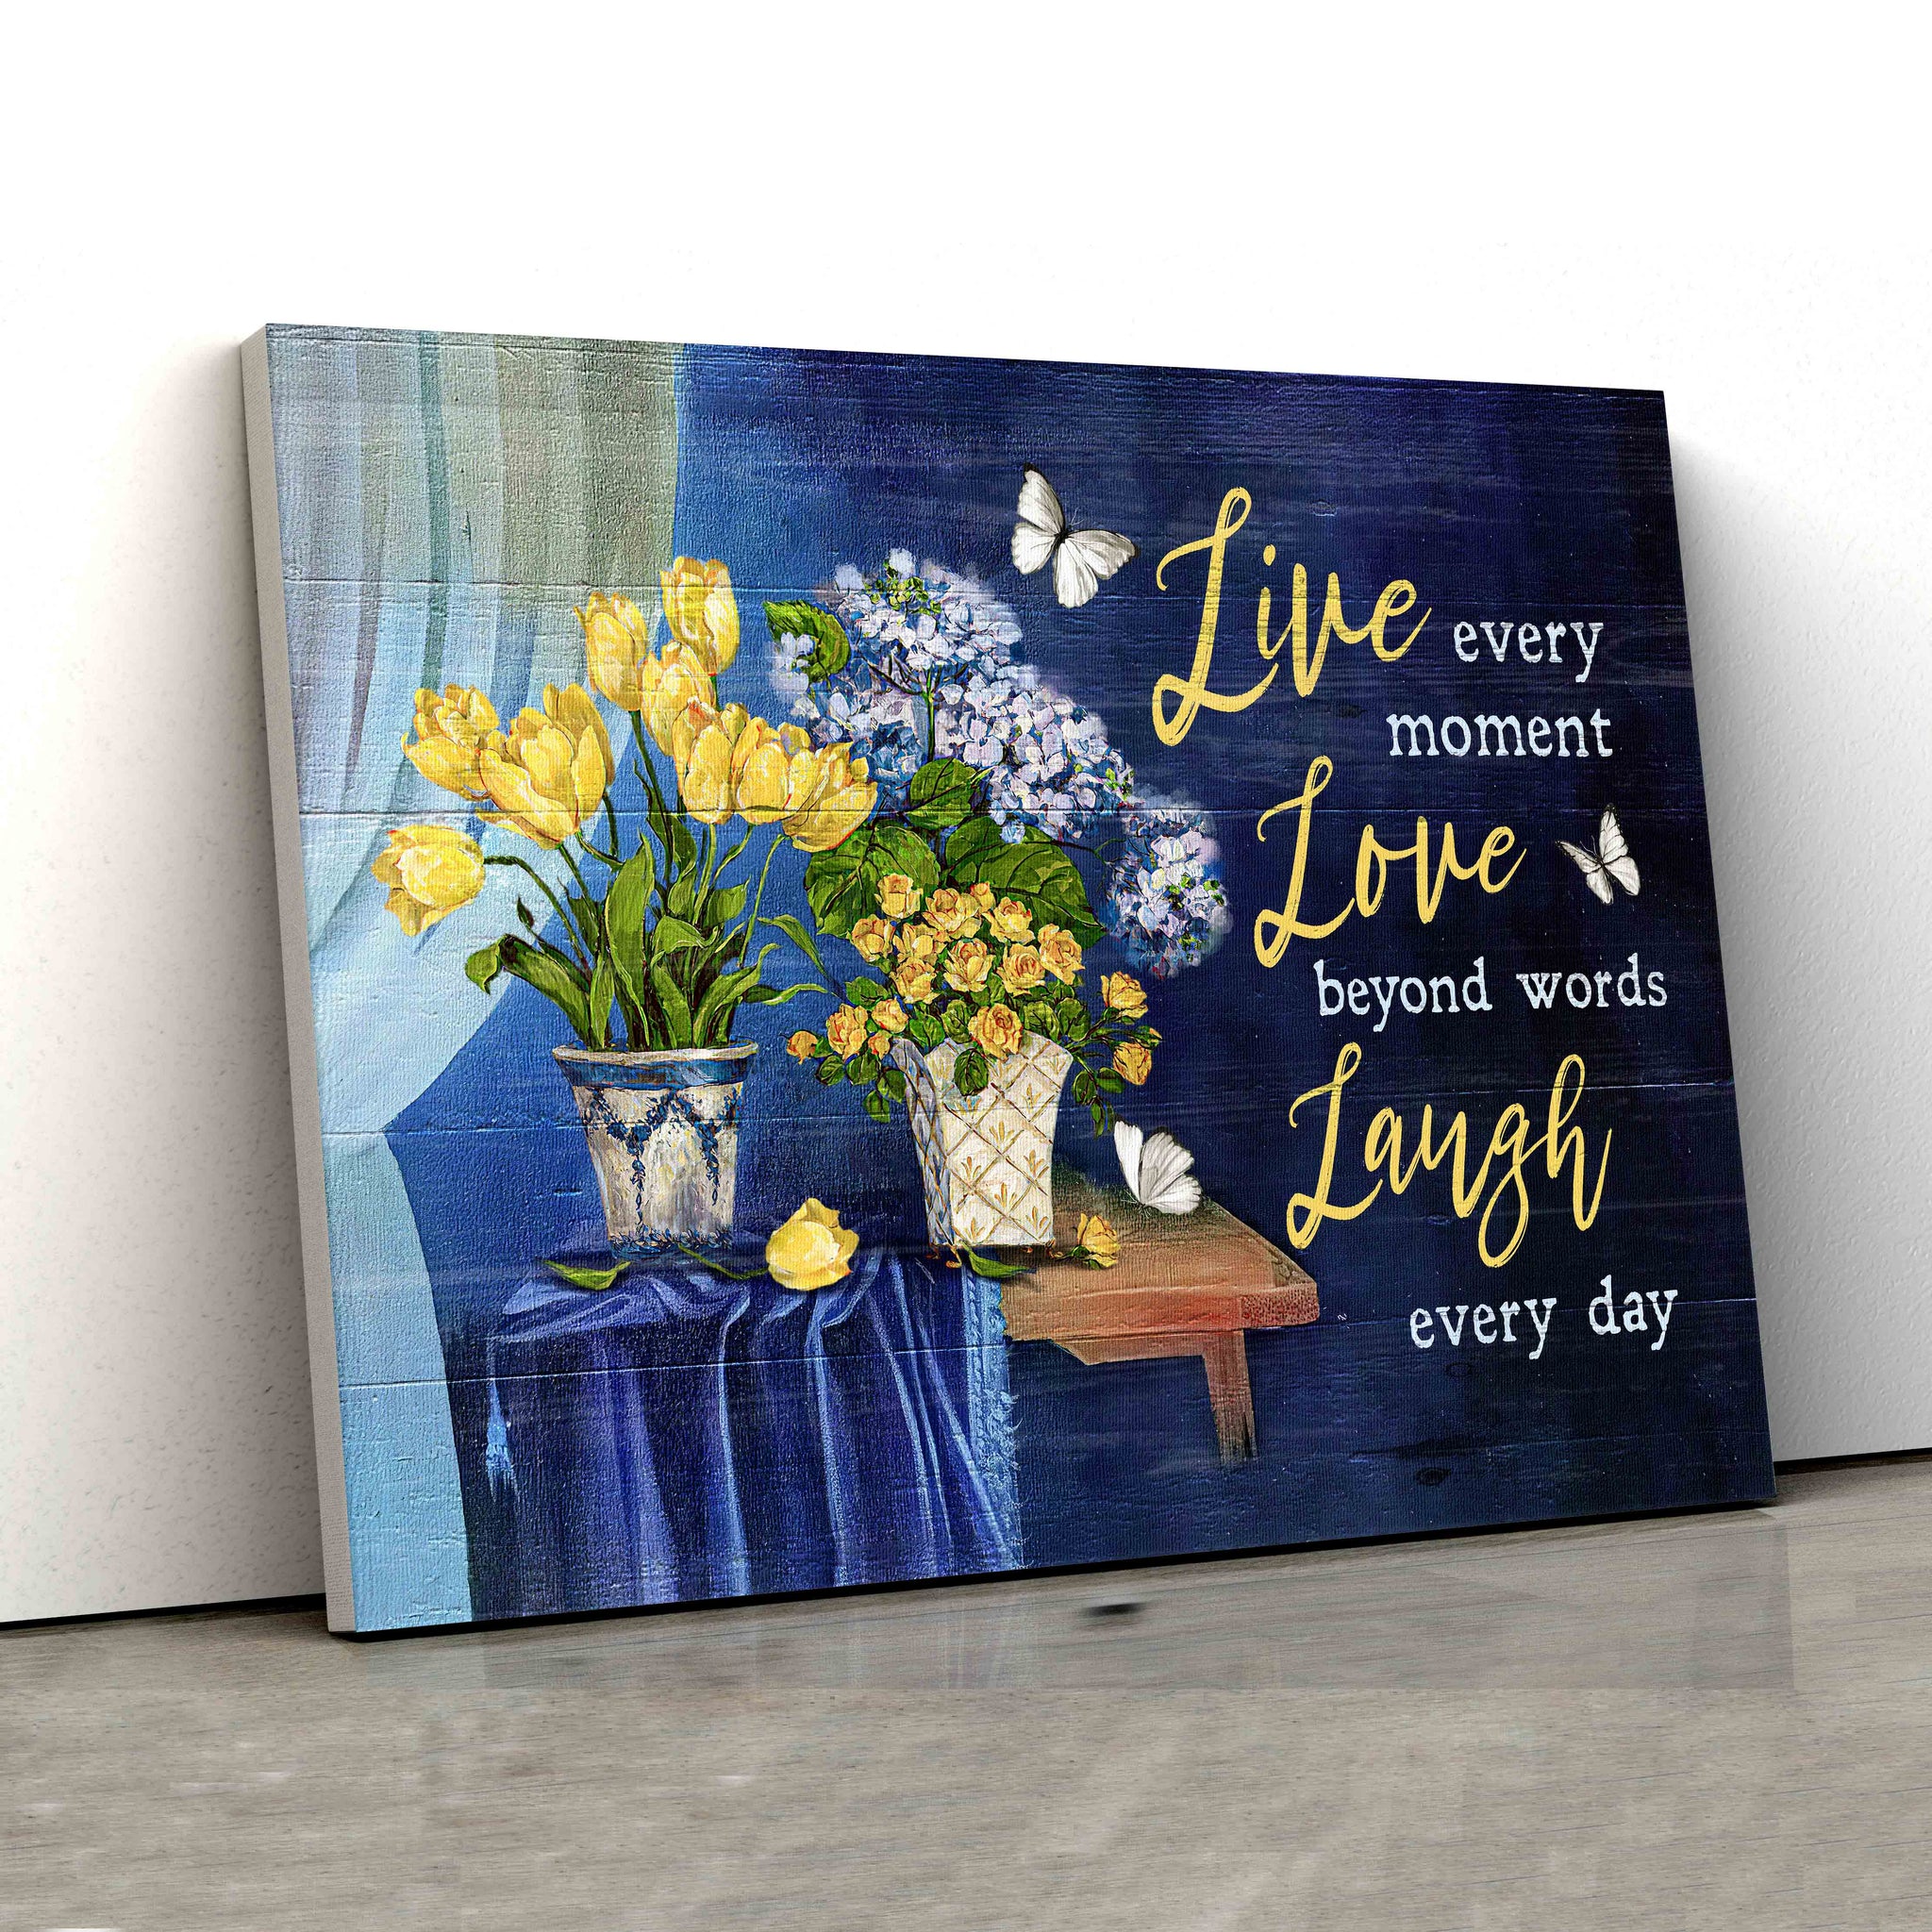 Live Every Moment Canvas, Love Beyond Words Canvas, Laugh Every Day Canvas, Flower Canvas, Butterfly Canvas, Gift Canvas